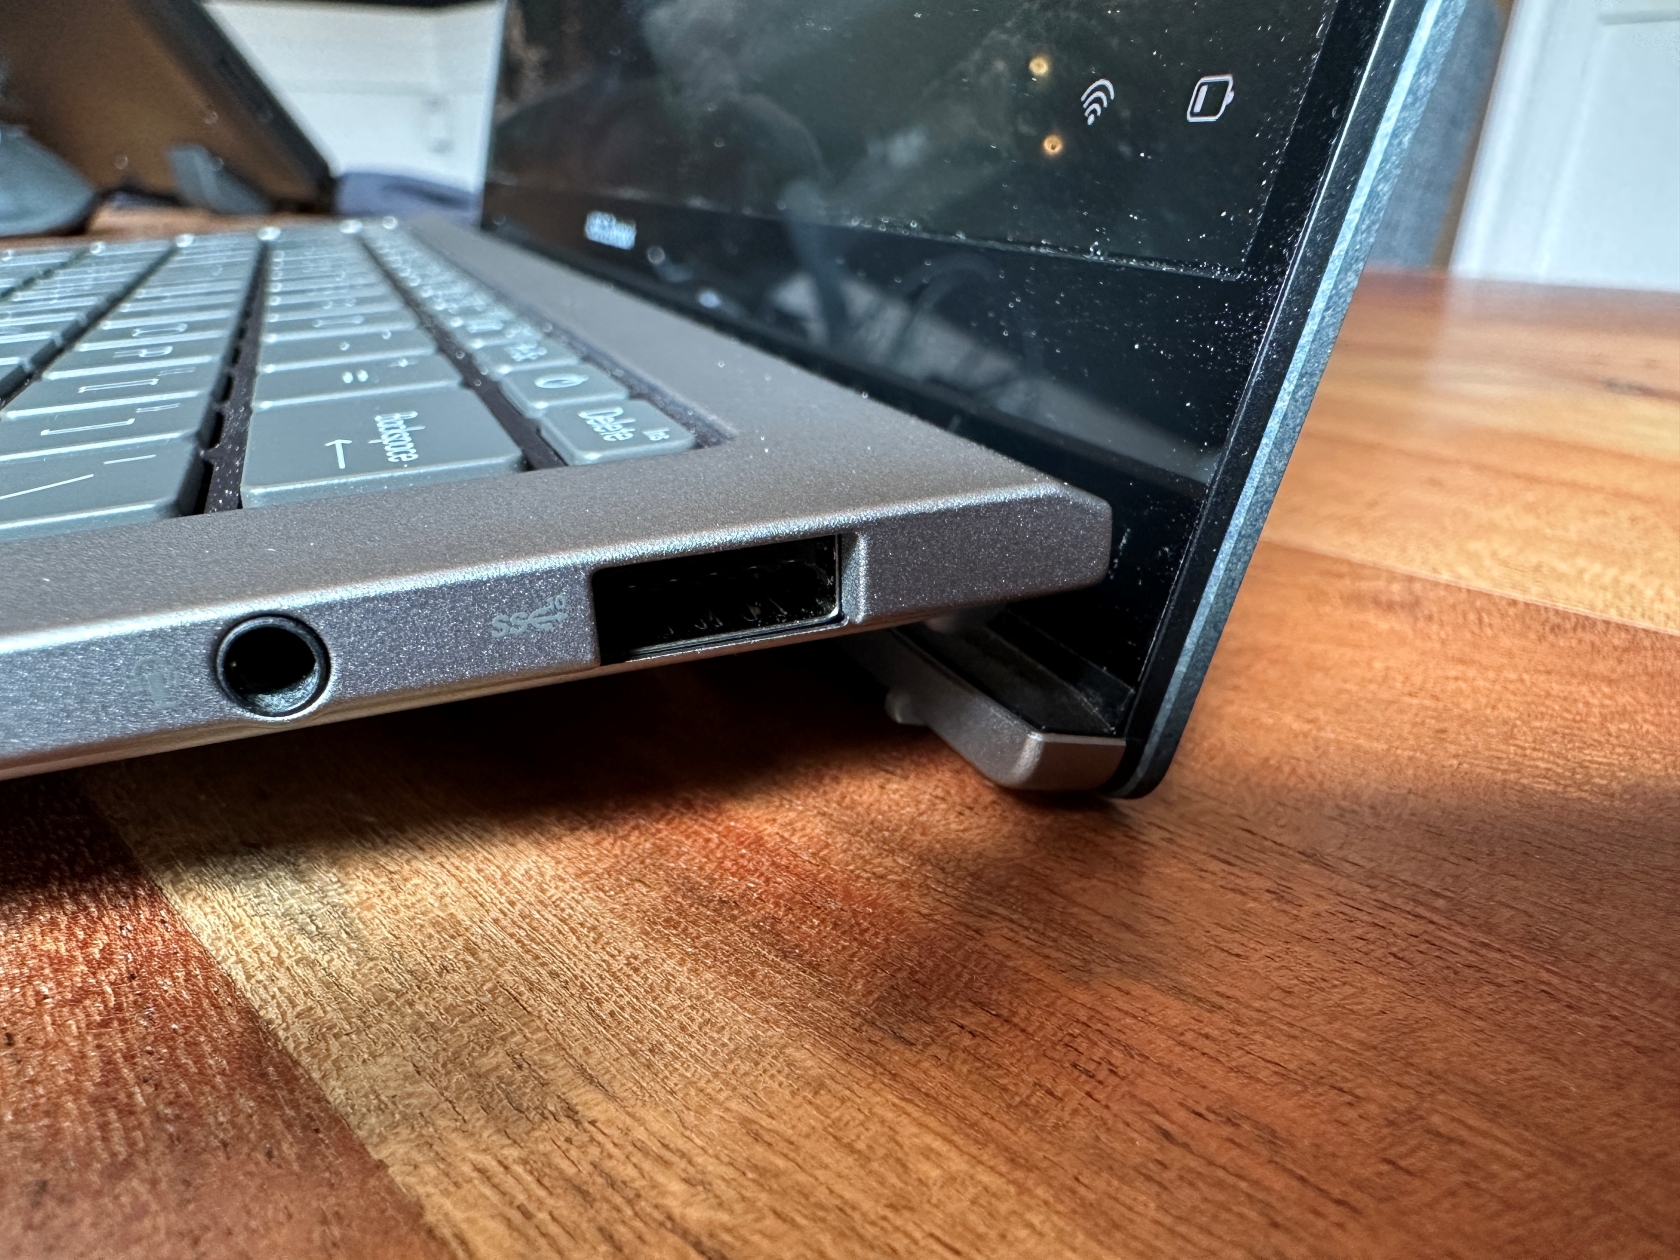 Asus Zenbook S 13 OLED right ports and hinge